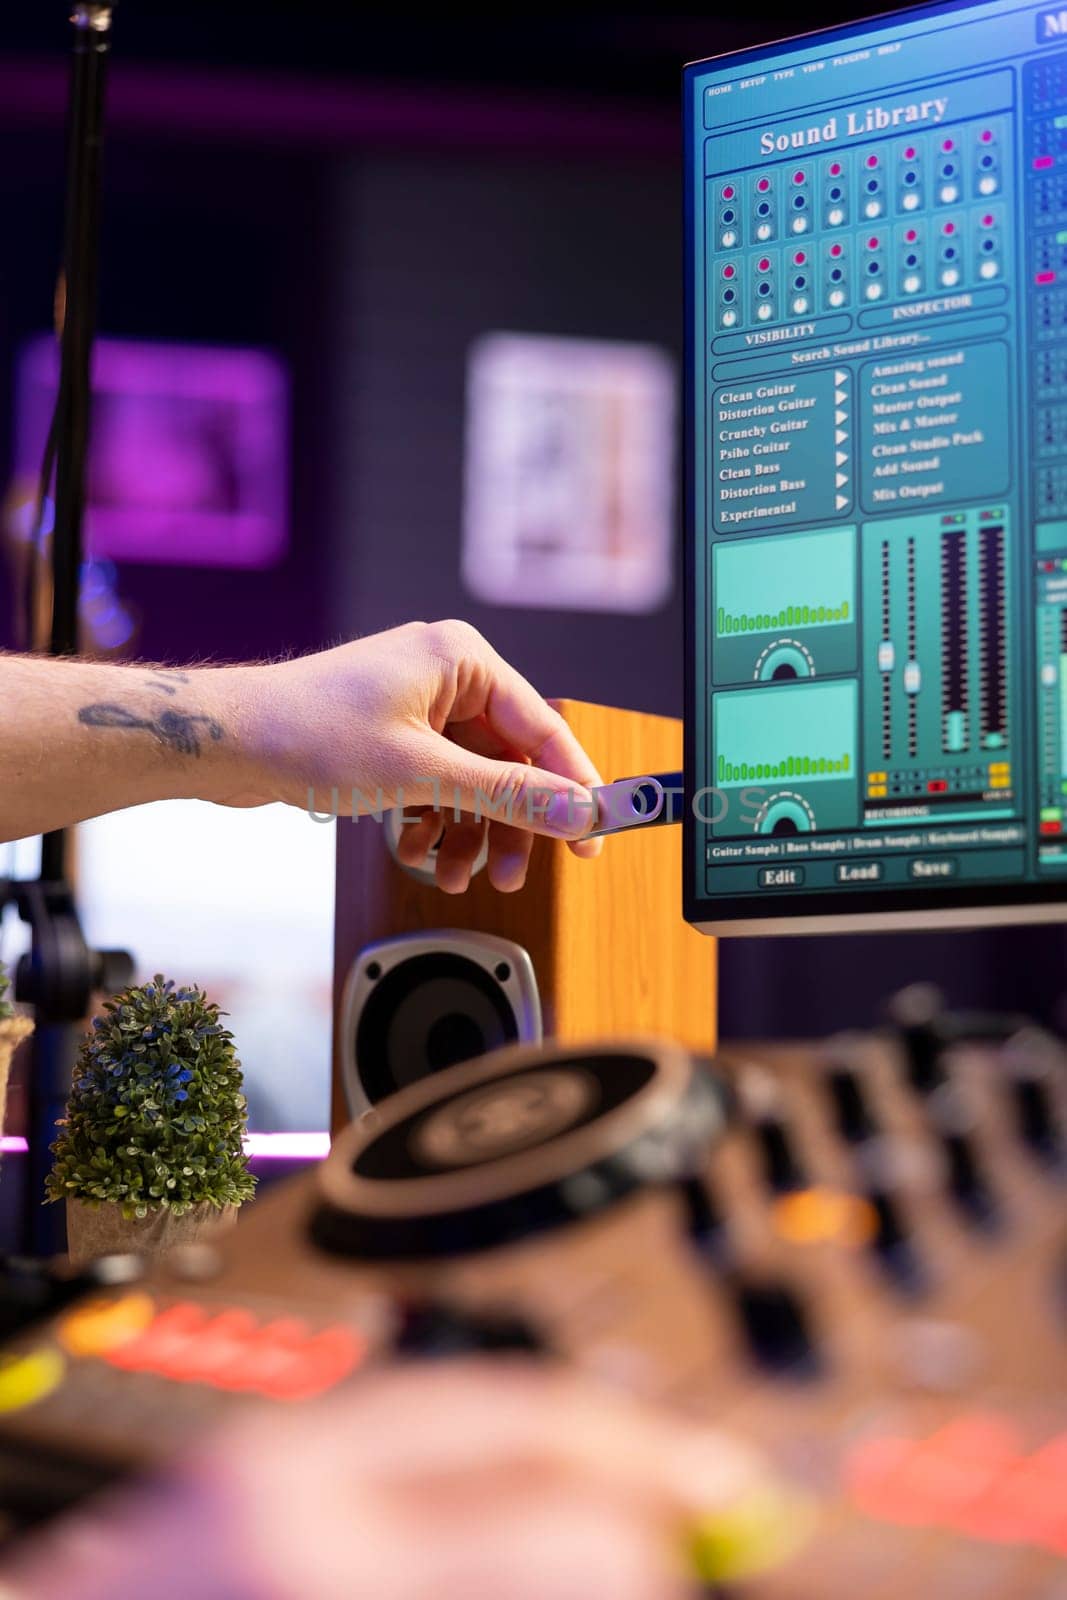 Talented producer using an usb stick to edit recorded audio files by DCStudio